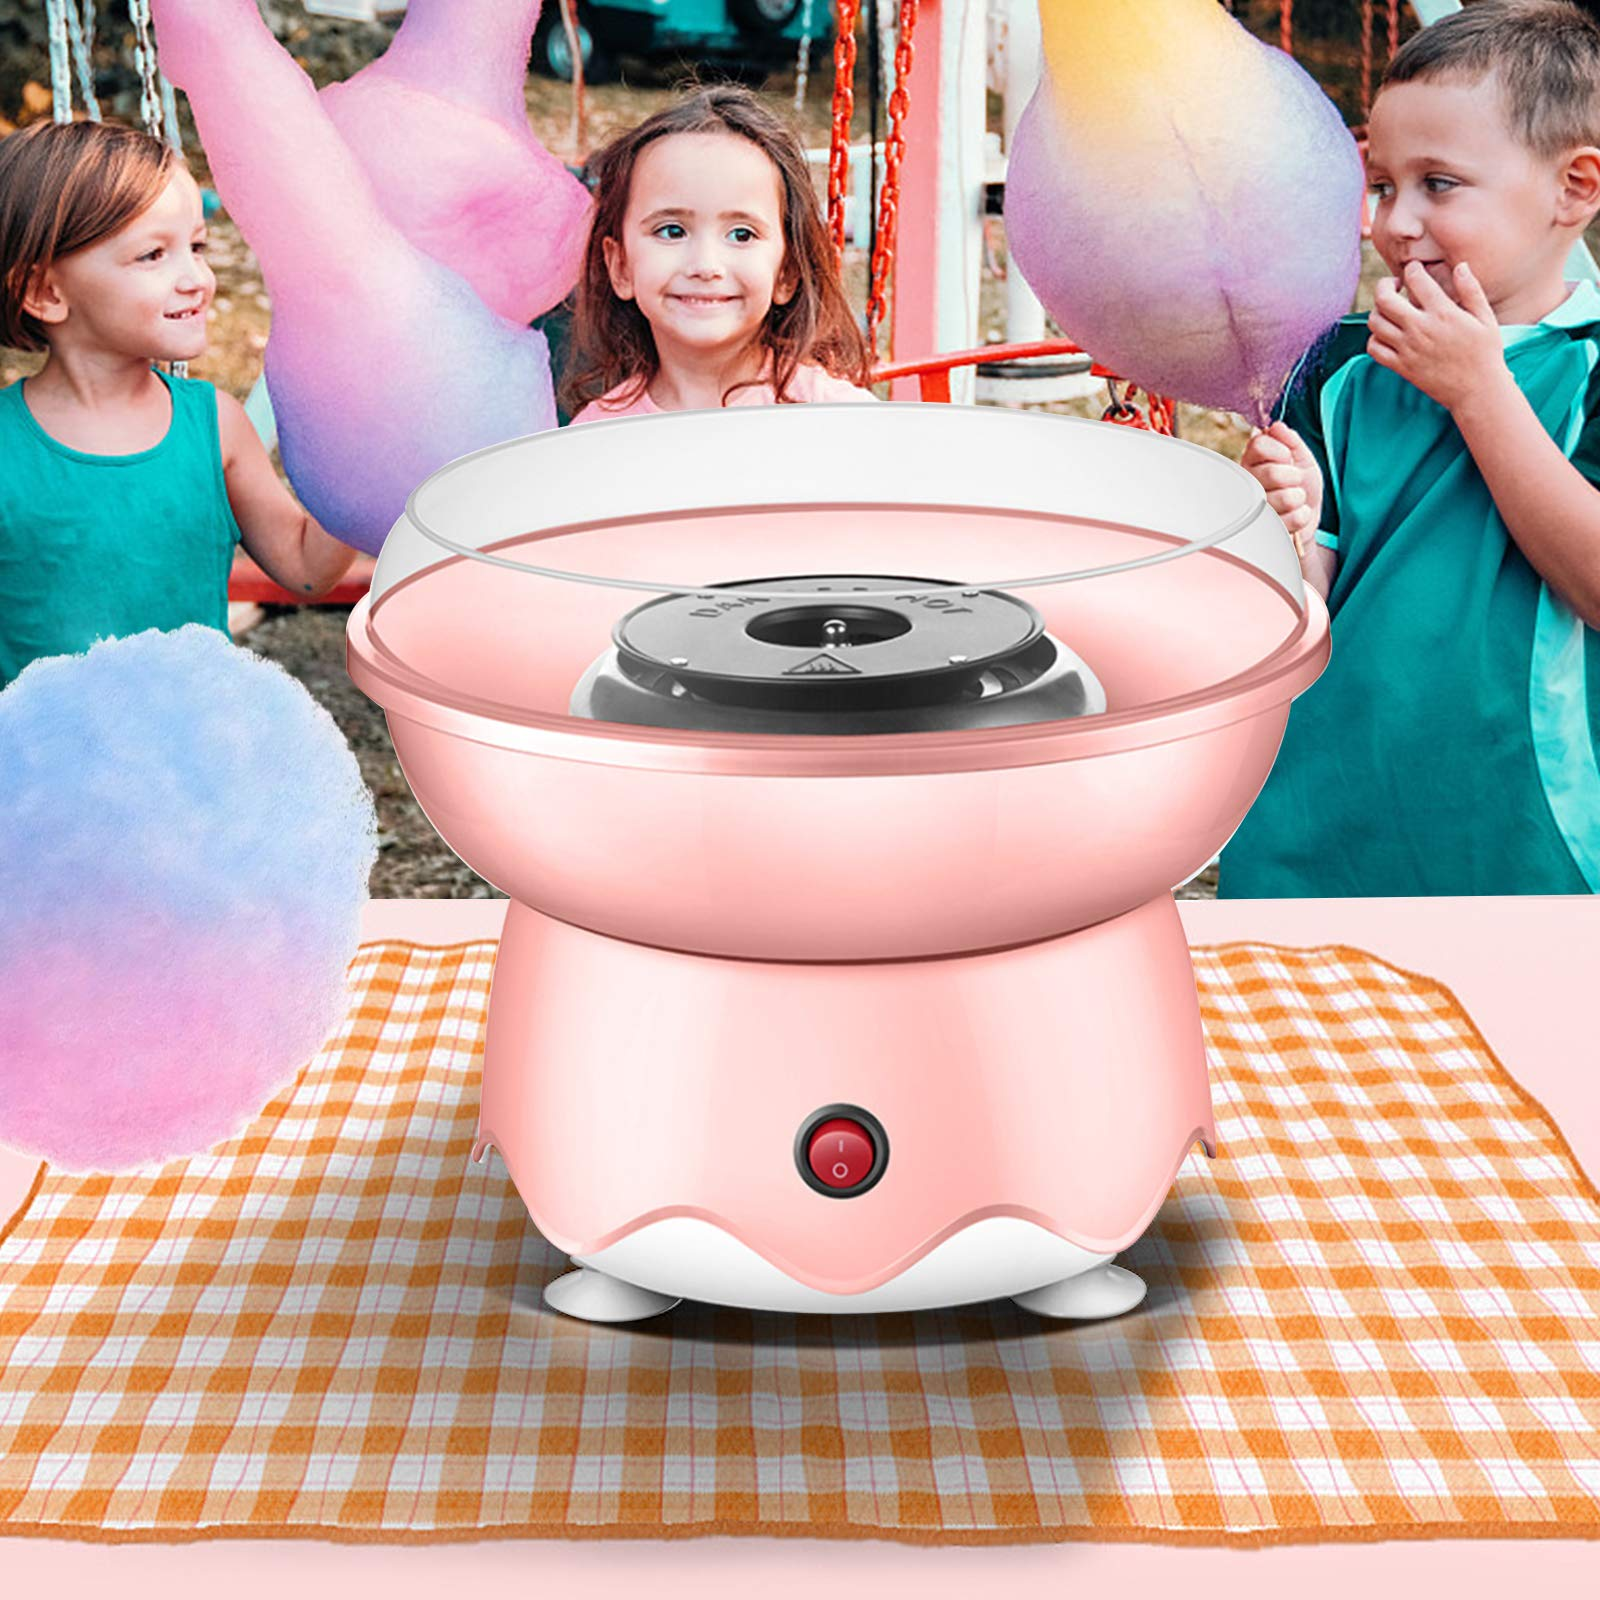 Pink Portable Cotton Candy Machine for Kids Homemade Cotton Candy Maker Hard & Sugar Free Cotton Candy Maker Includes 10 Reusable Bamboo Sticks and Sugar Scoop for Home Birthday Family Party 